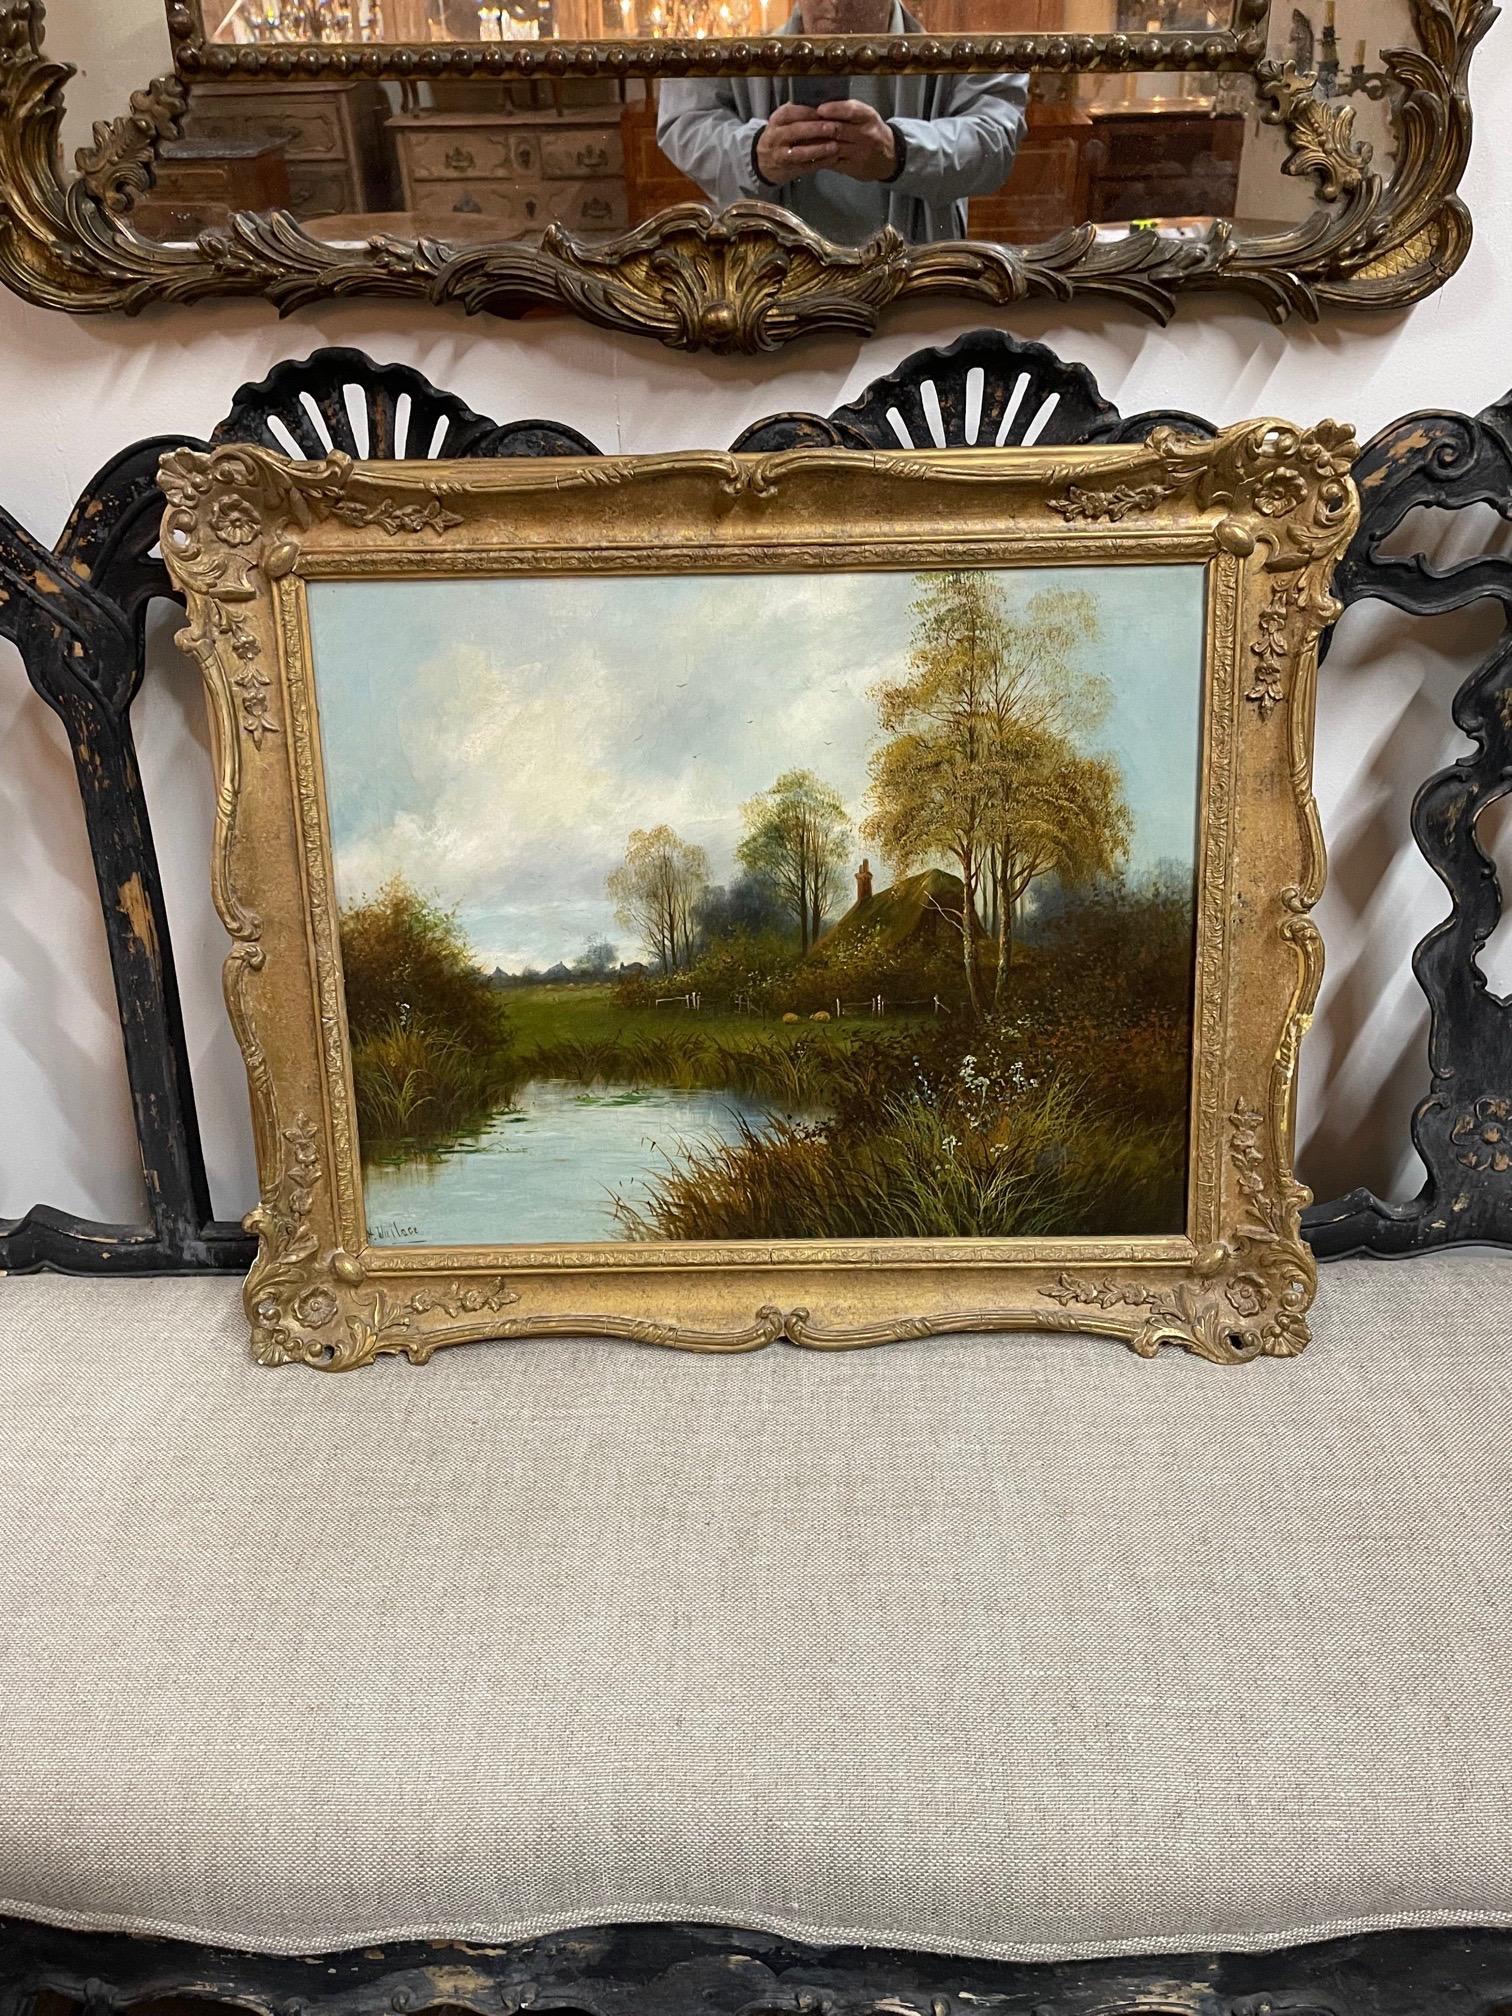 Beautiful antique English oil painting on canvas signed by H Wallace. Featuring a soothing landscape scene with a cottage and a river in a nice giltwood frame. Pretty!!